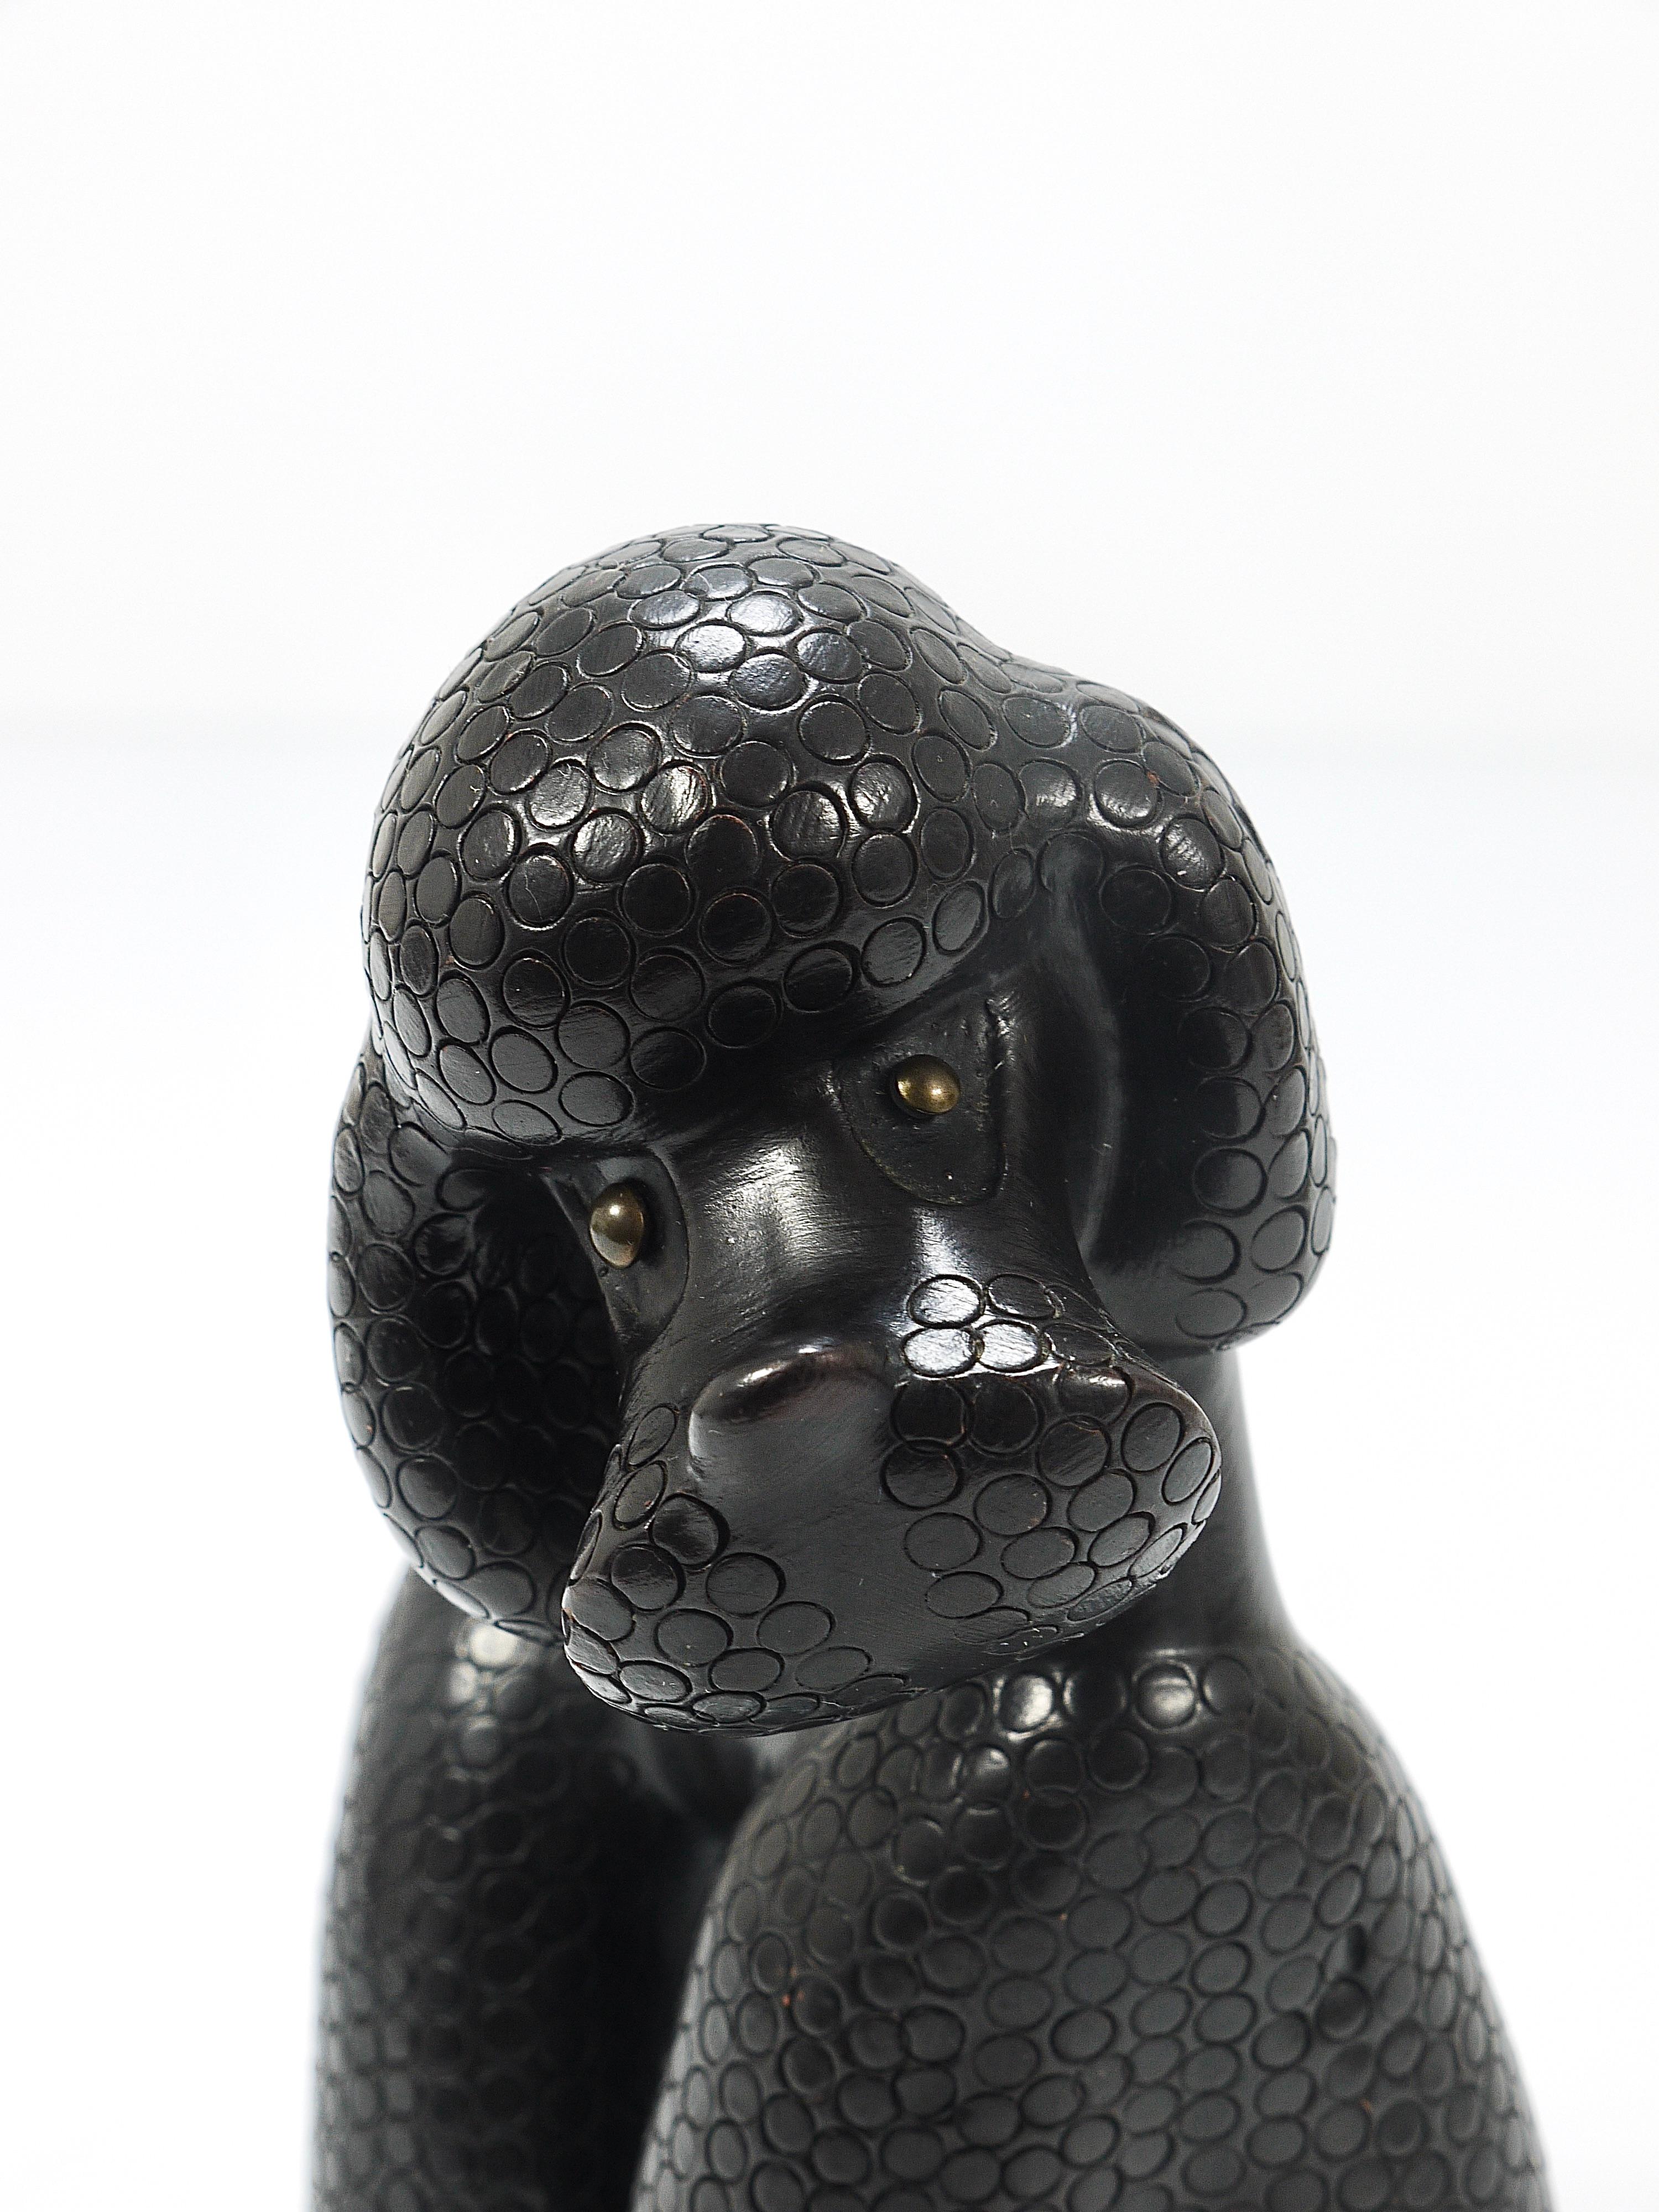 Charming Dog Poodle Sculpture Figurine by Leopold Anzengruber, Austria, 1950s 3